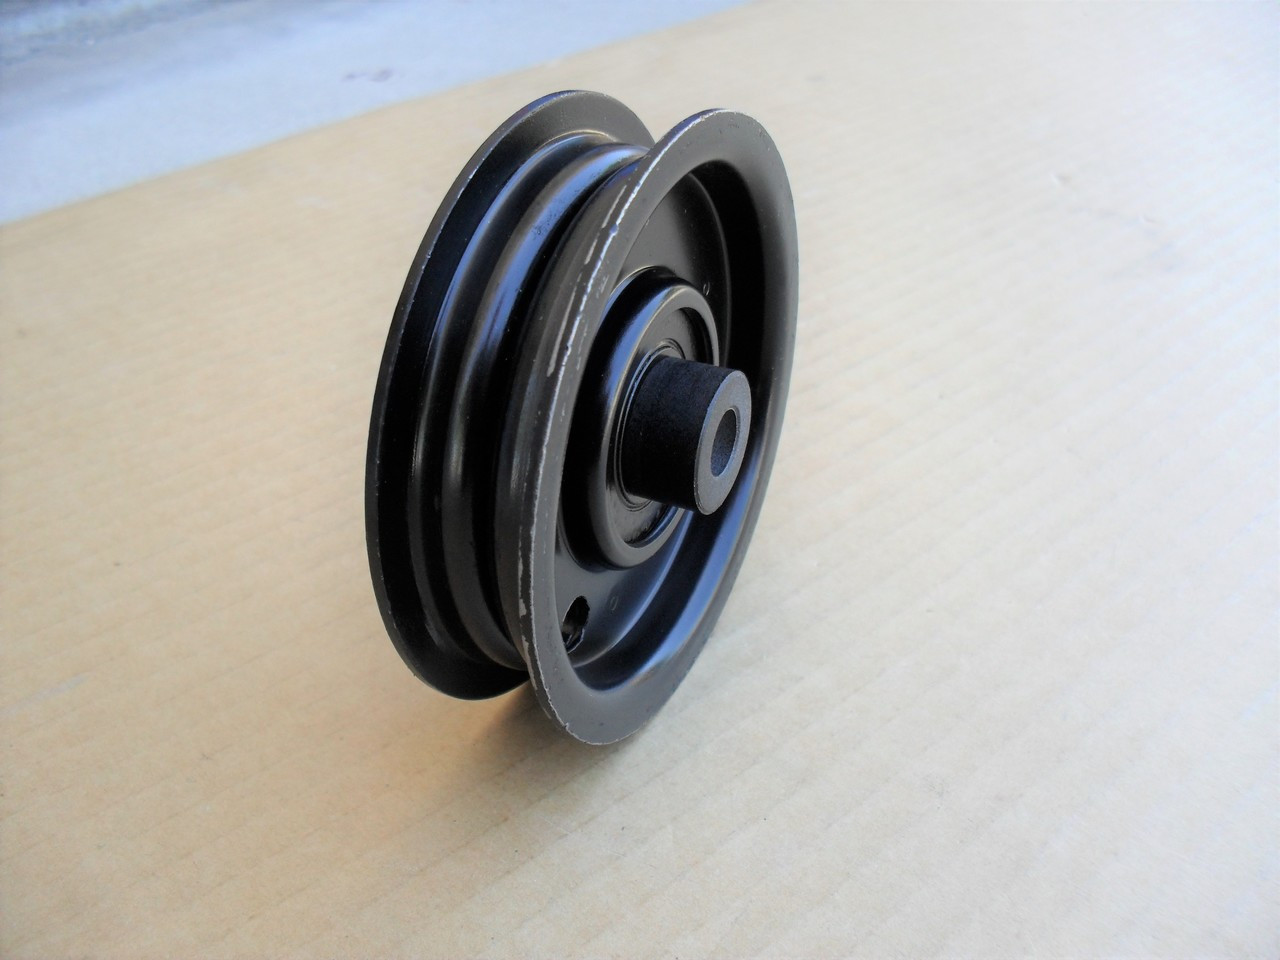 Flat Idler Pulley for AYP, Craftsman, Poulan LT125, LTH145, 123674X, 123688, 532123674 Height: 7/8" ID: 3/8" OD: 3-9/16" Made In USA